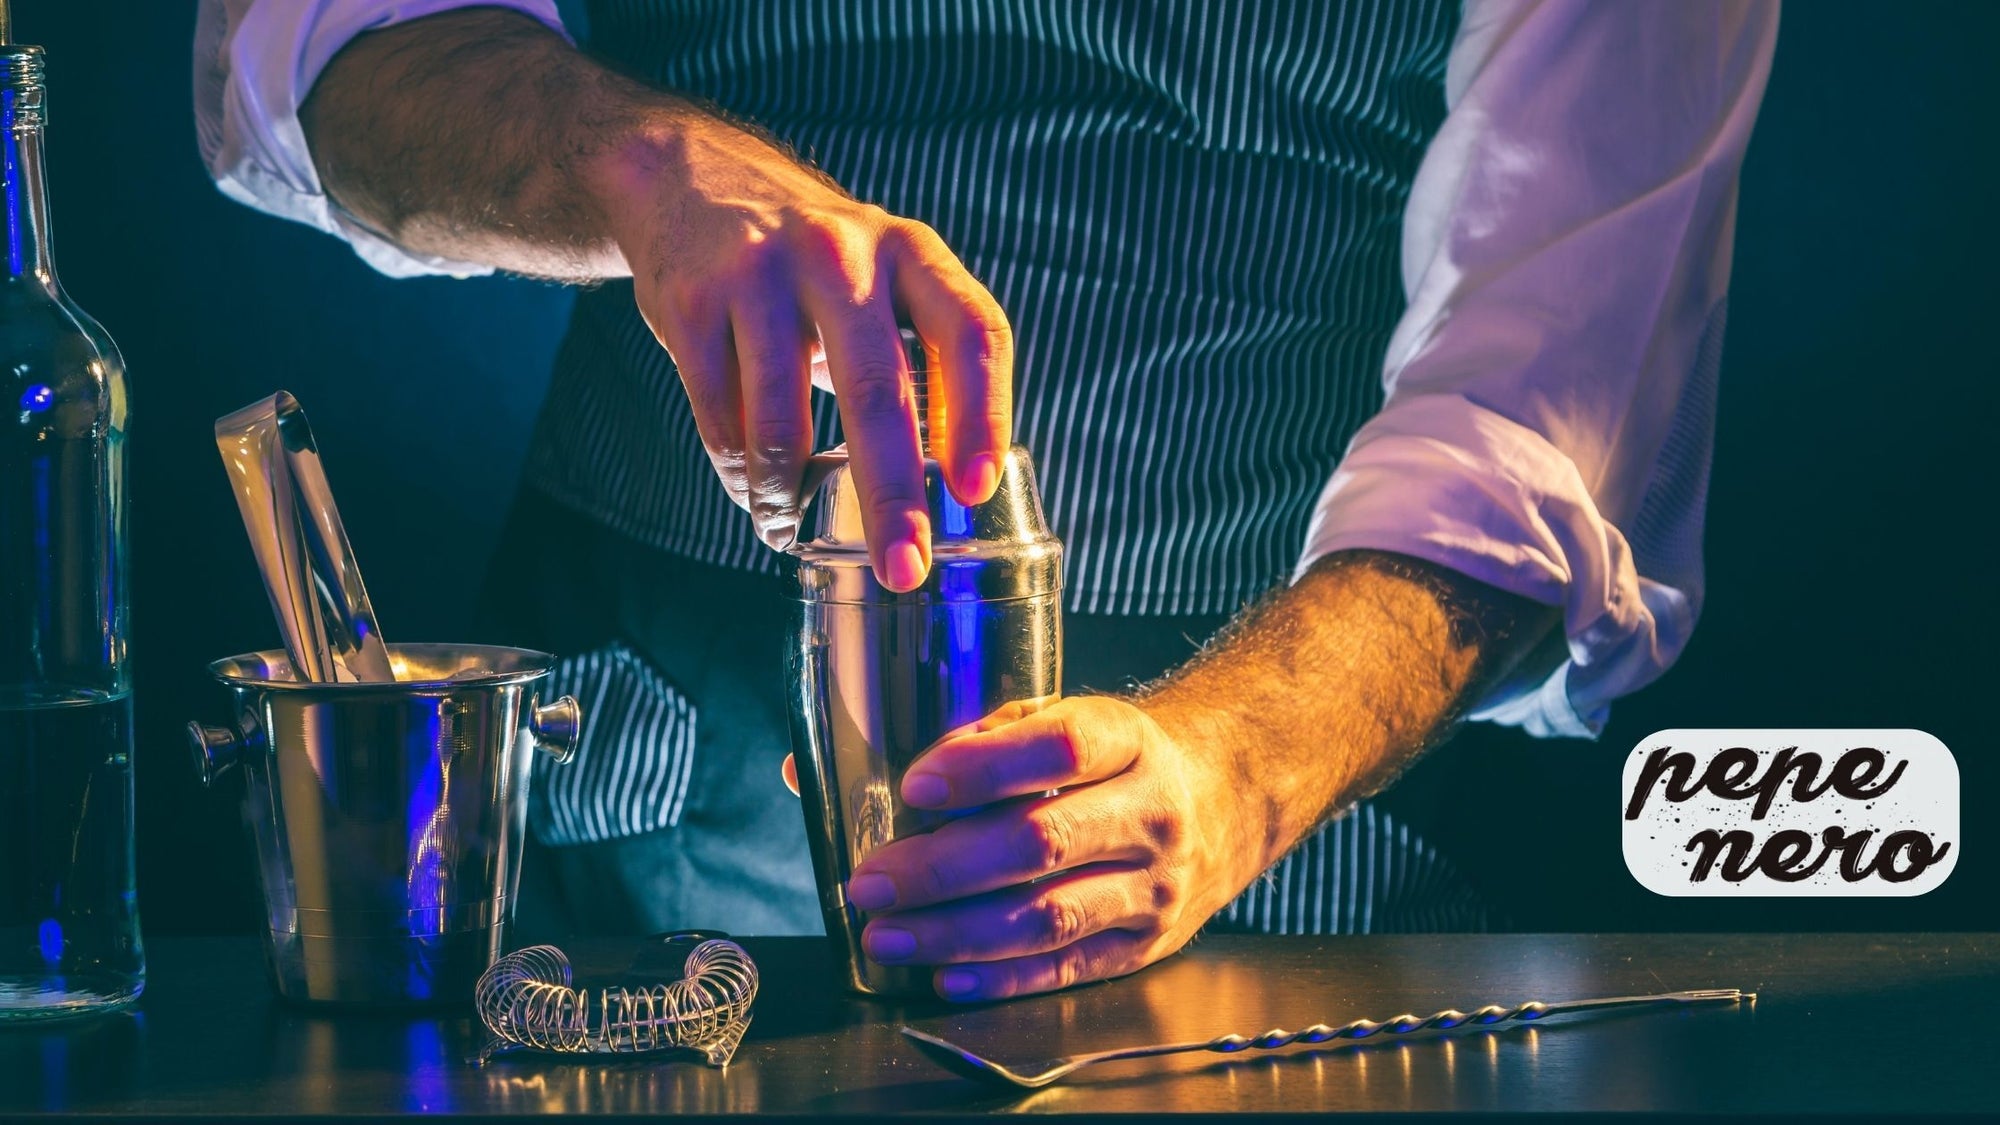 A mixologist using a cocktail mixer to mix drinks